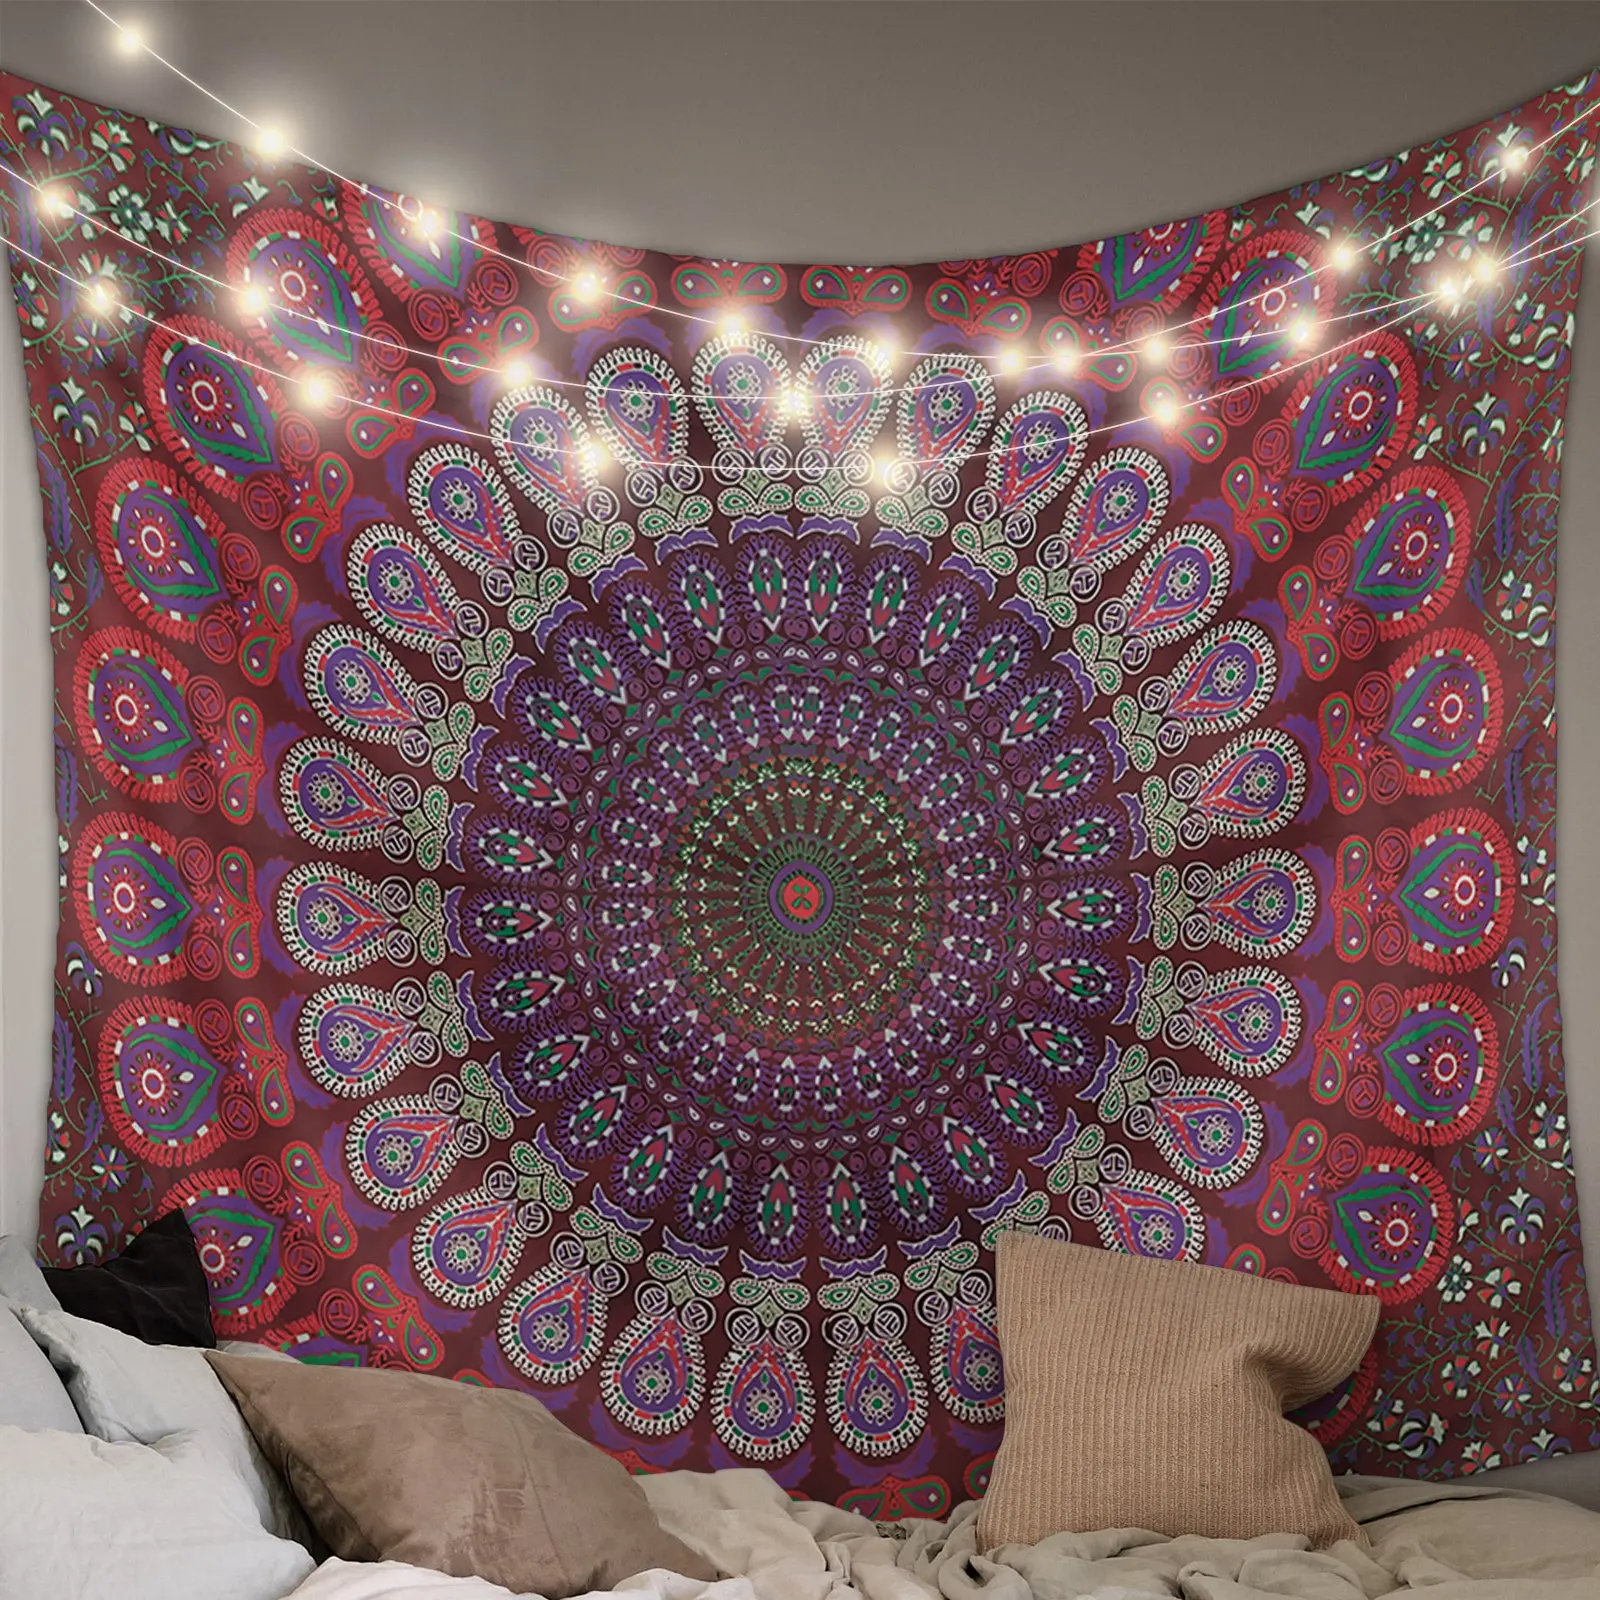 custom printed wall tapestry Indian wall decor art vintage mandala floral tapestry Indian wall hanging tapestry